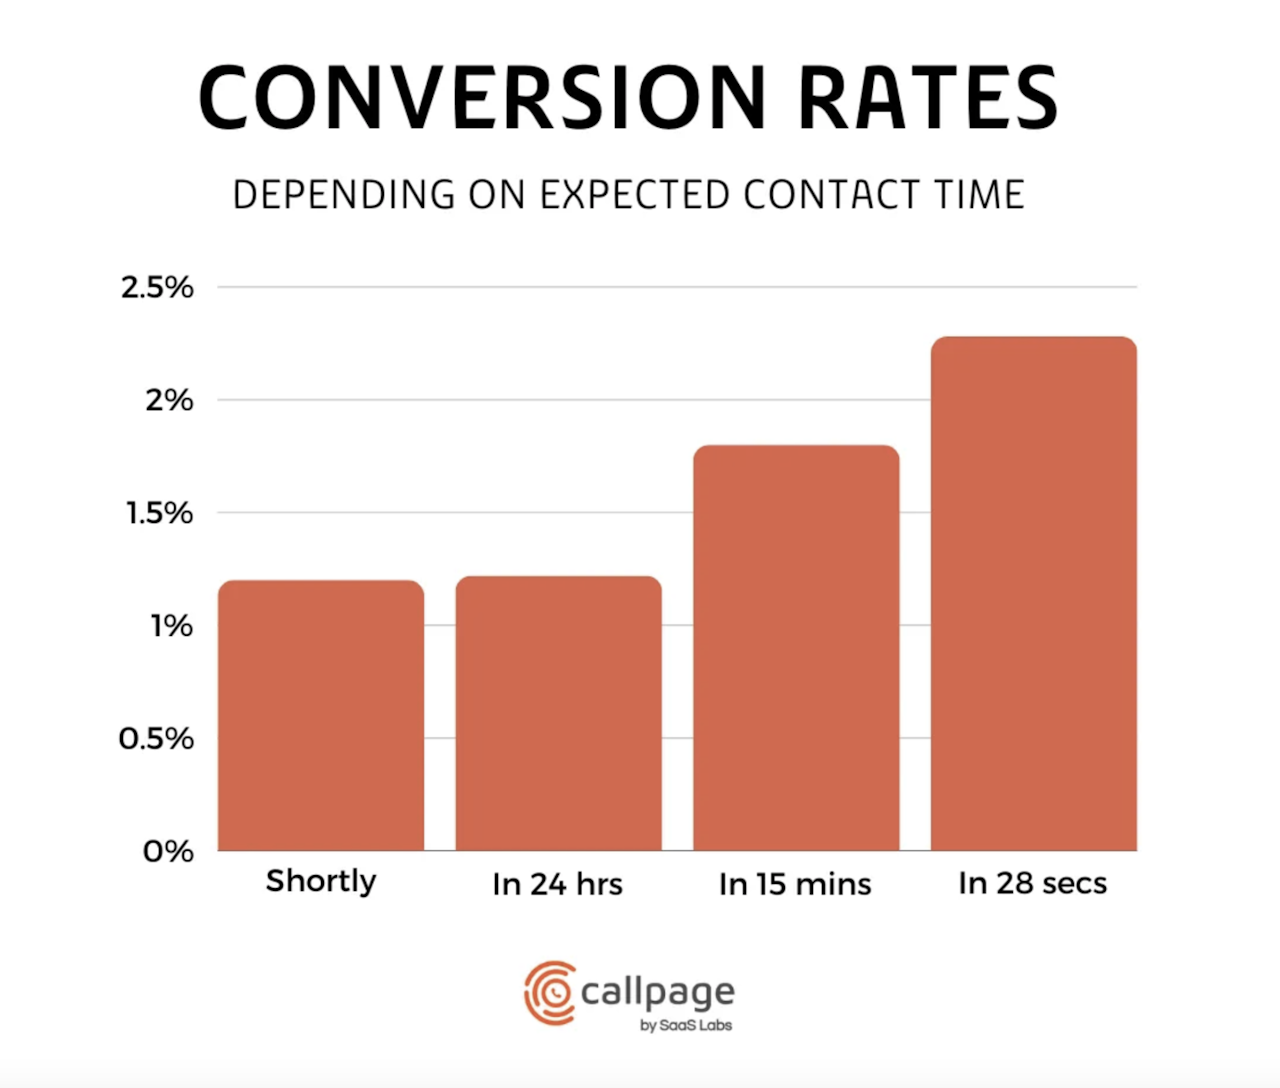 The impact of delayed responses on conversion rates